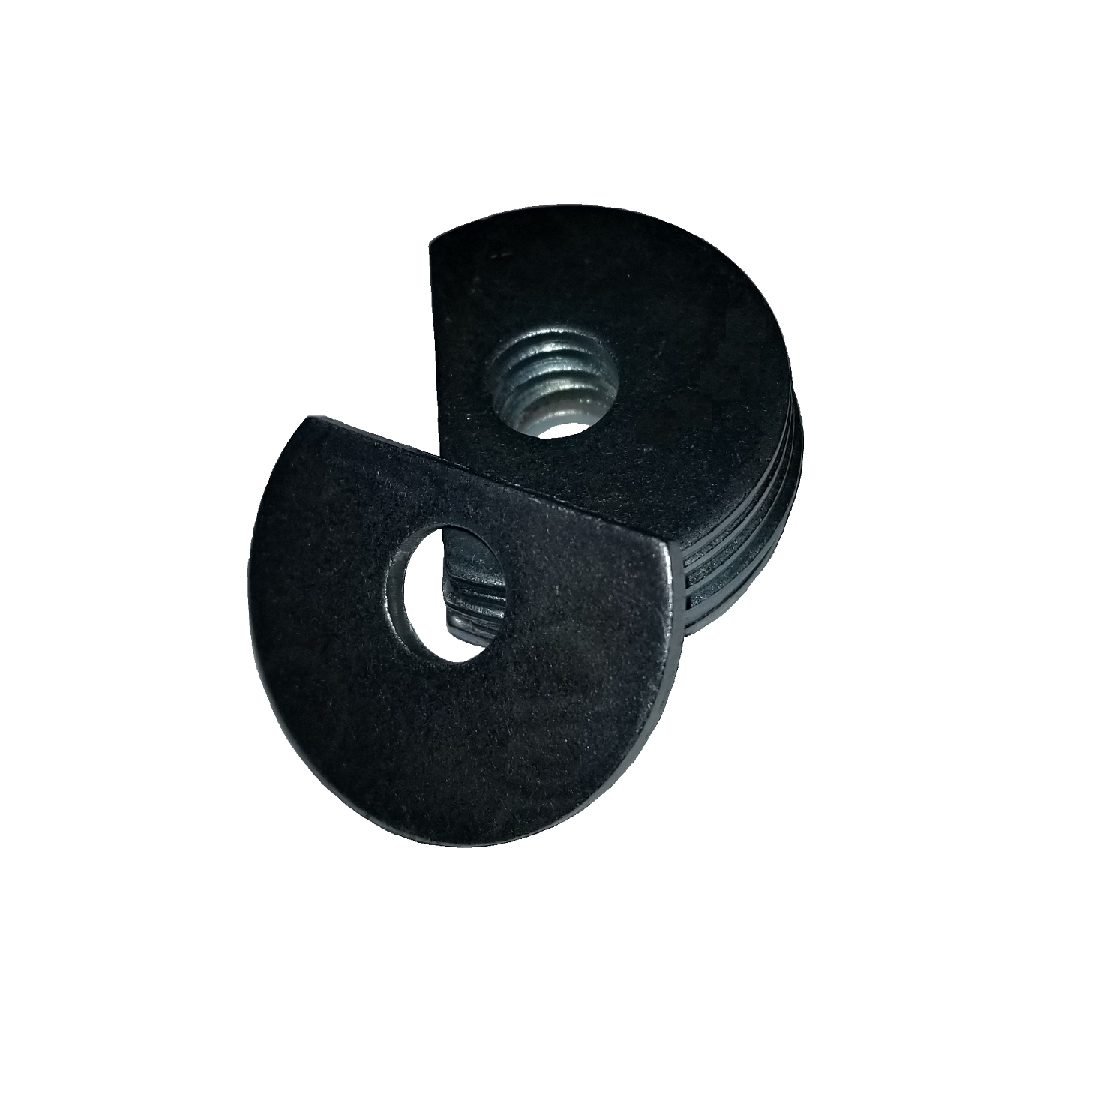 Clipped OD Washer - 0.531 ID, 1.265 OD, 0.140 Thick, Low Carbon Steel - Soft, Zinc & Clear